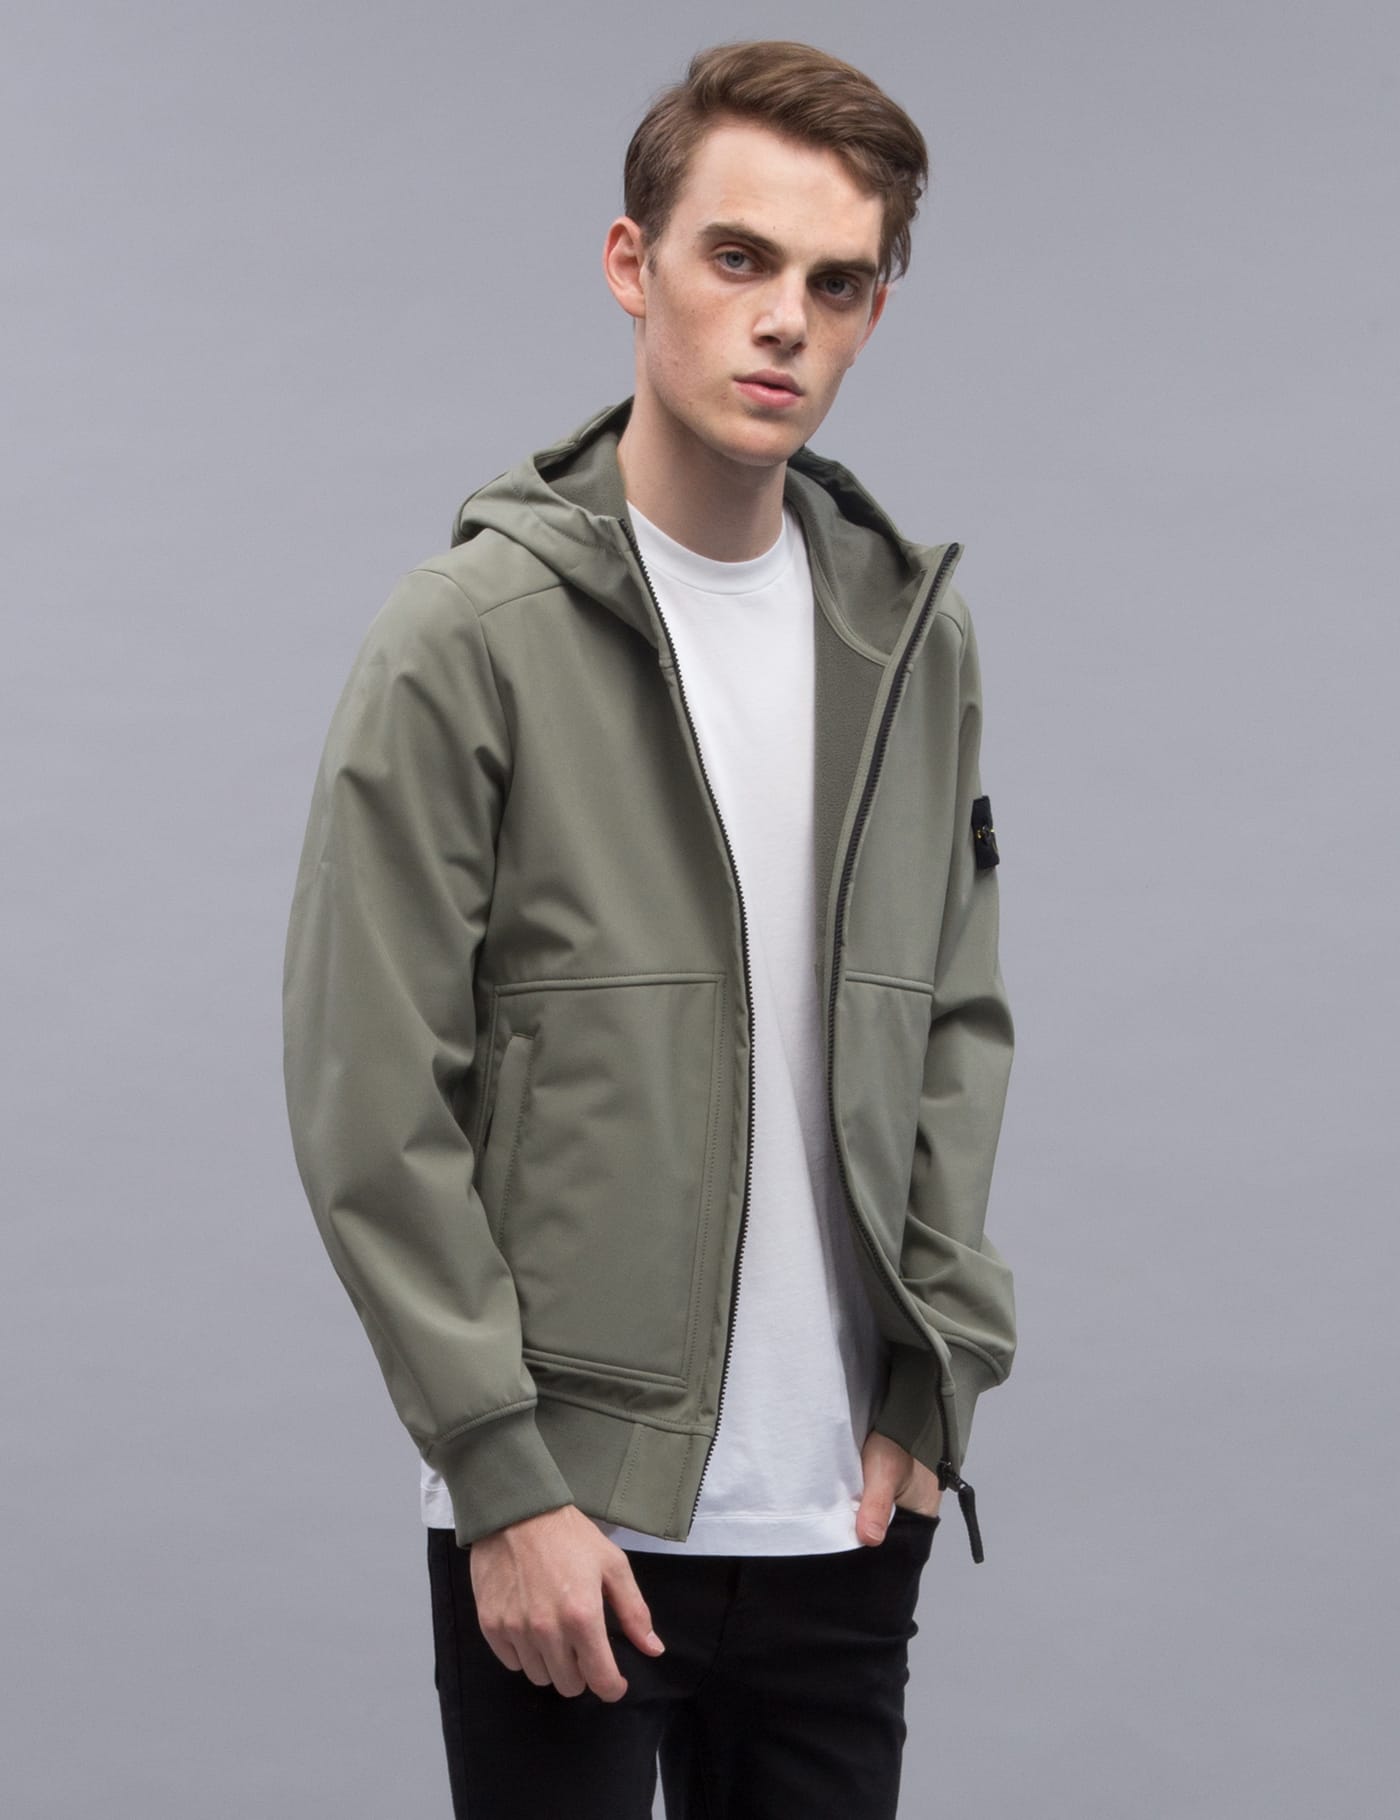 Stone Island - Soft Shell-R | HBX - Globally Curated Fashion and 